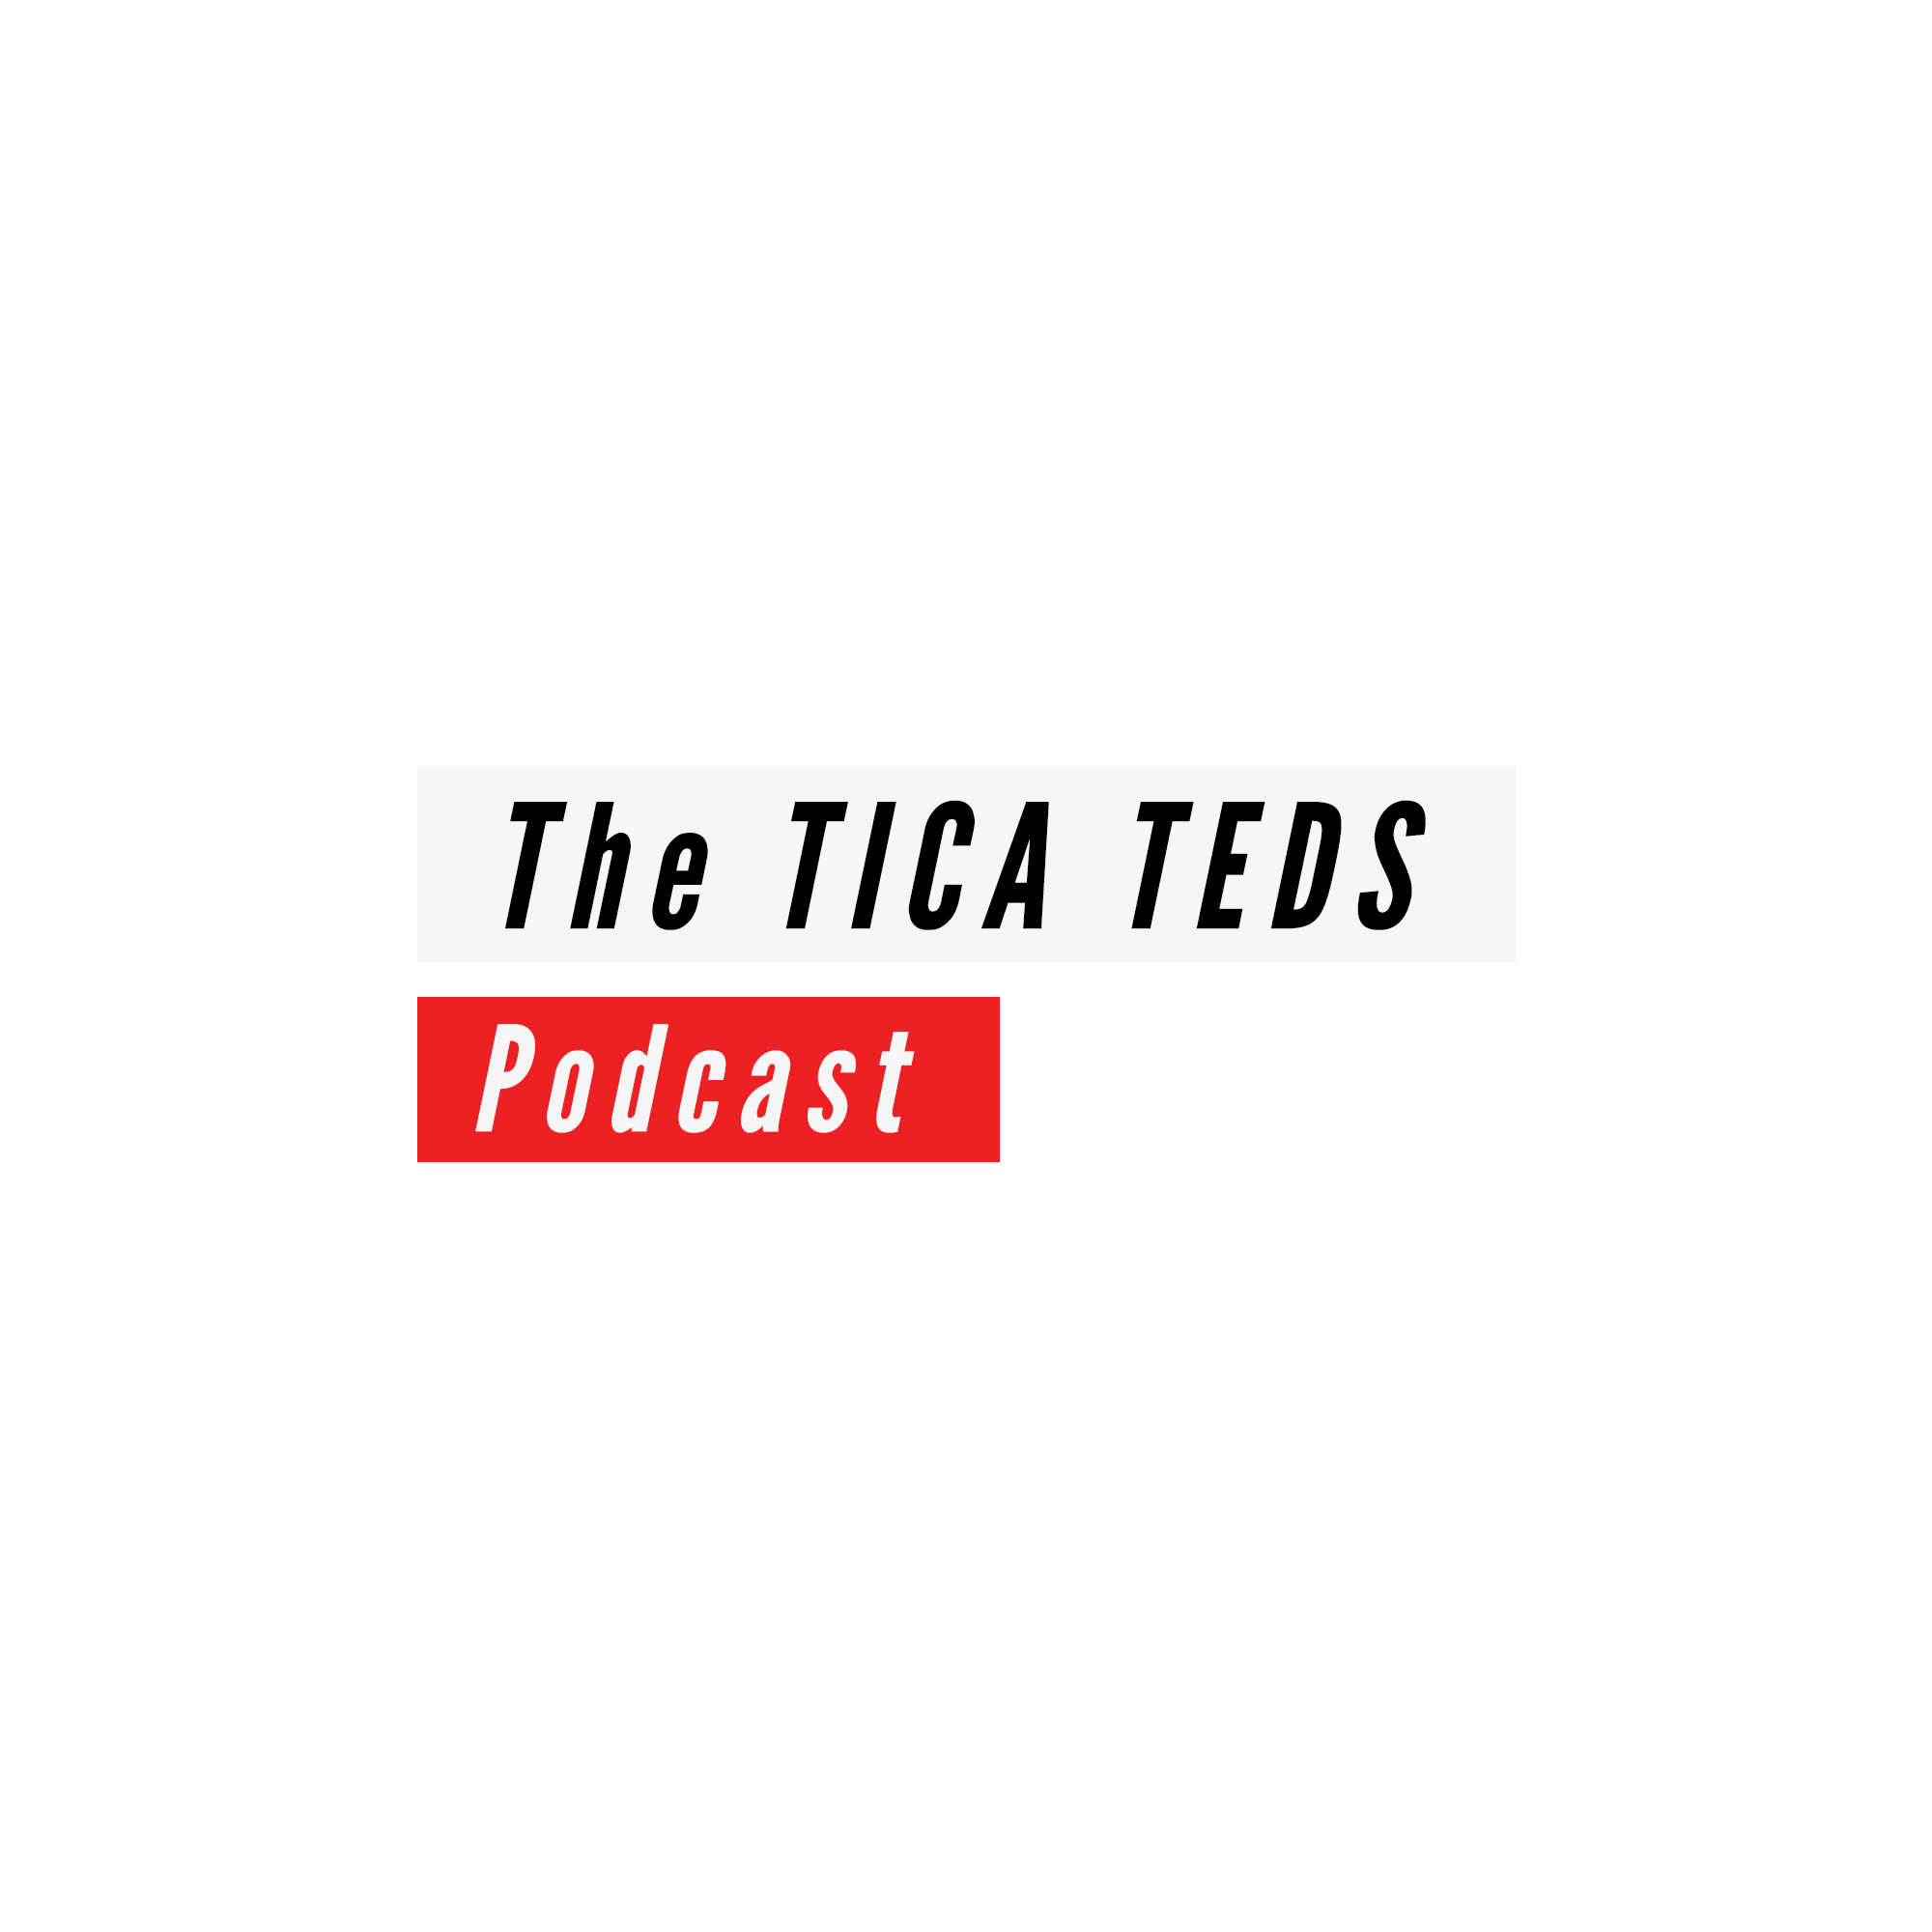 The TICA TEDS Podcast